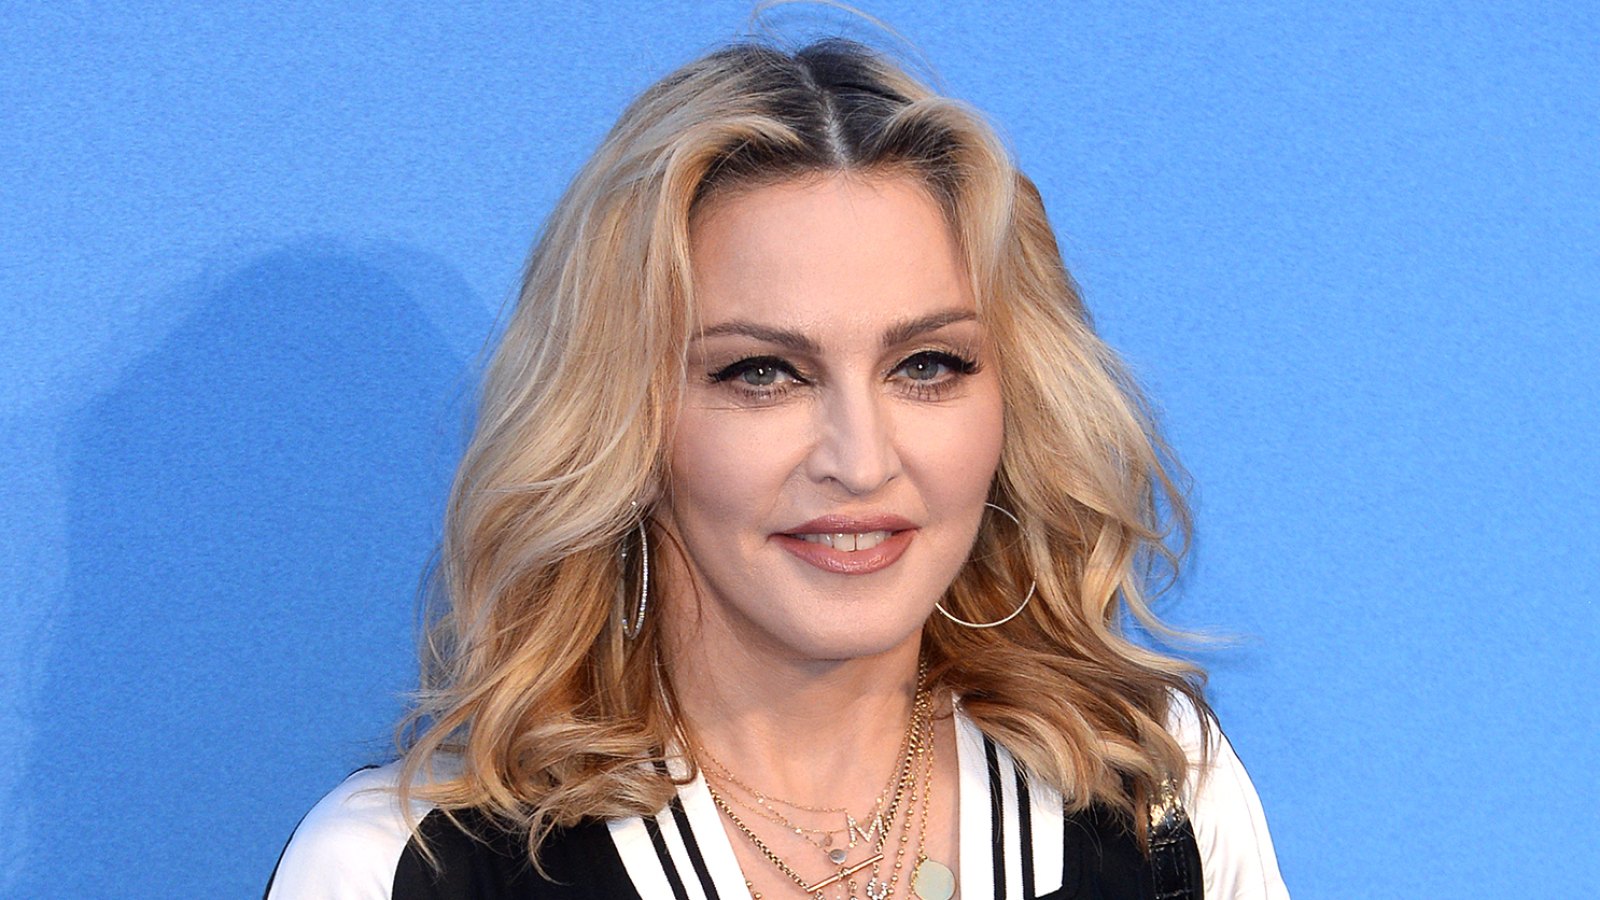 Madonna Shares Rare Family Photo With All 6 Kids on Thanksgiving: 'What I'm Thankful For'